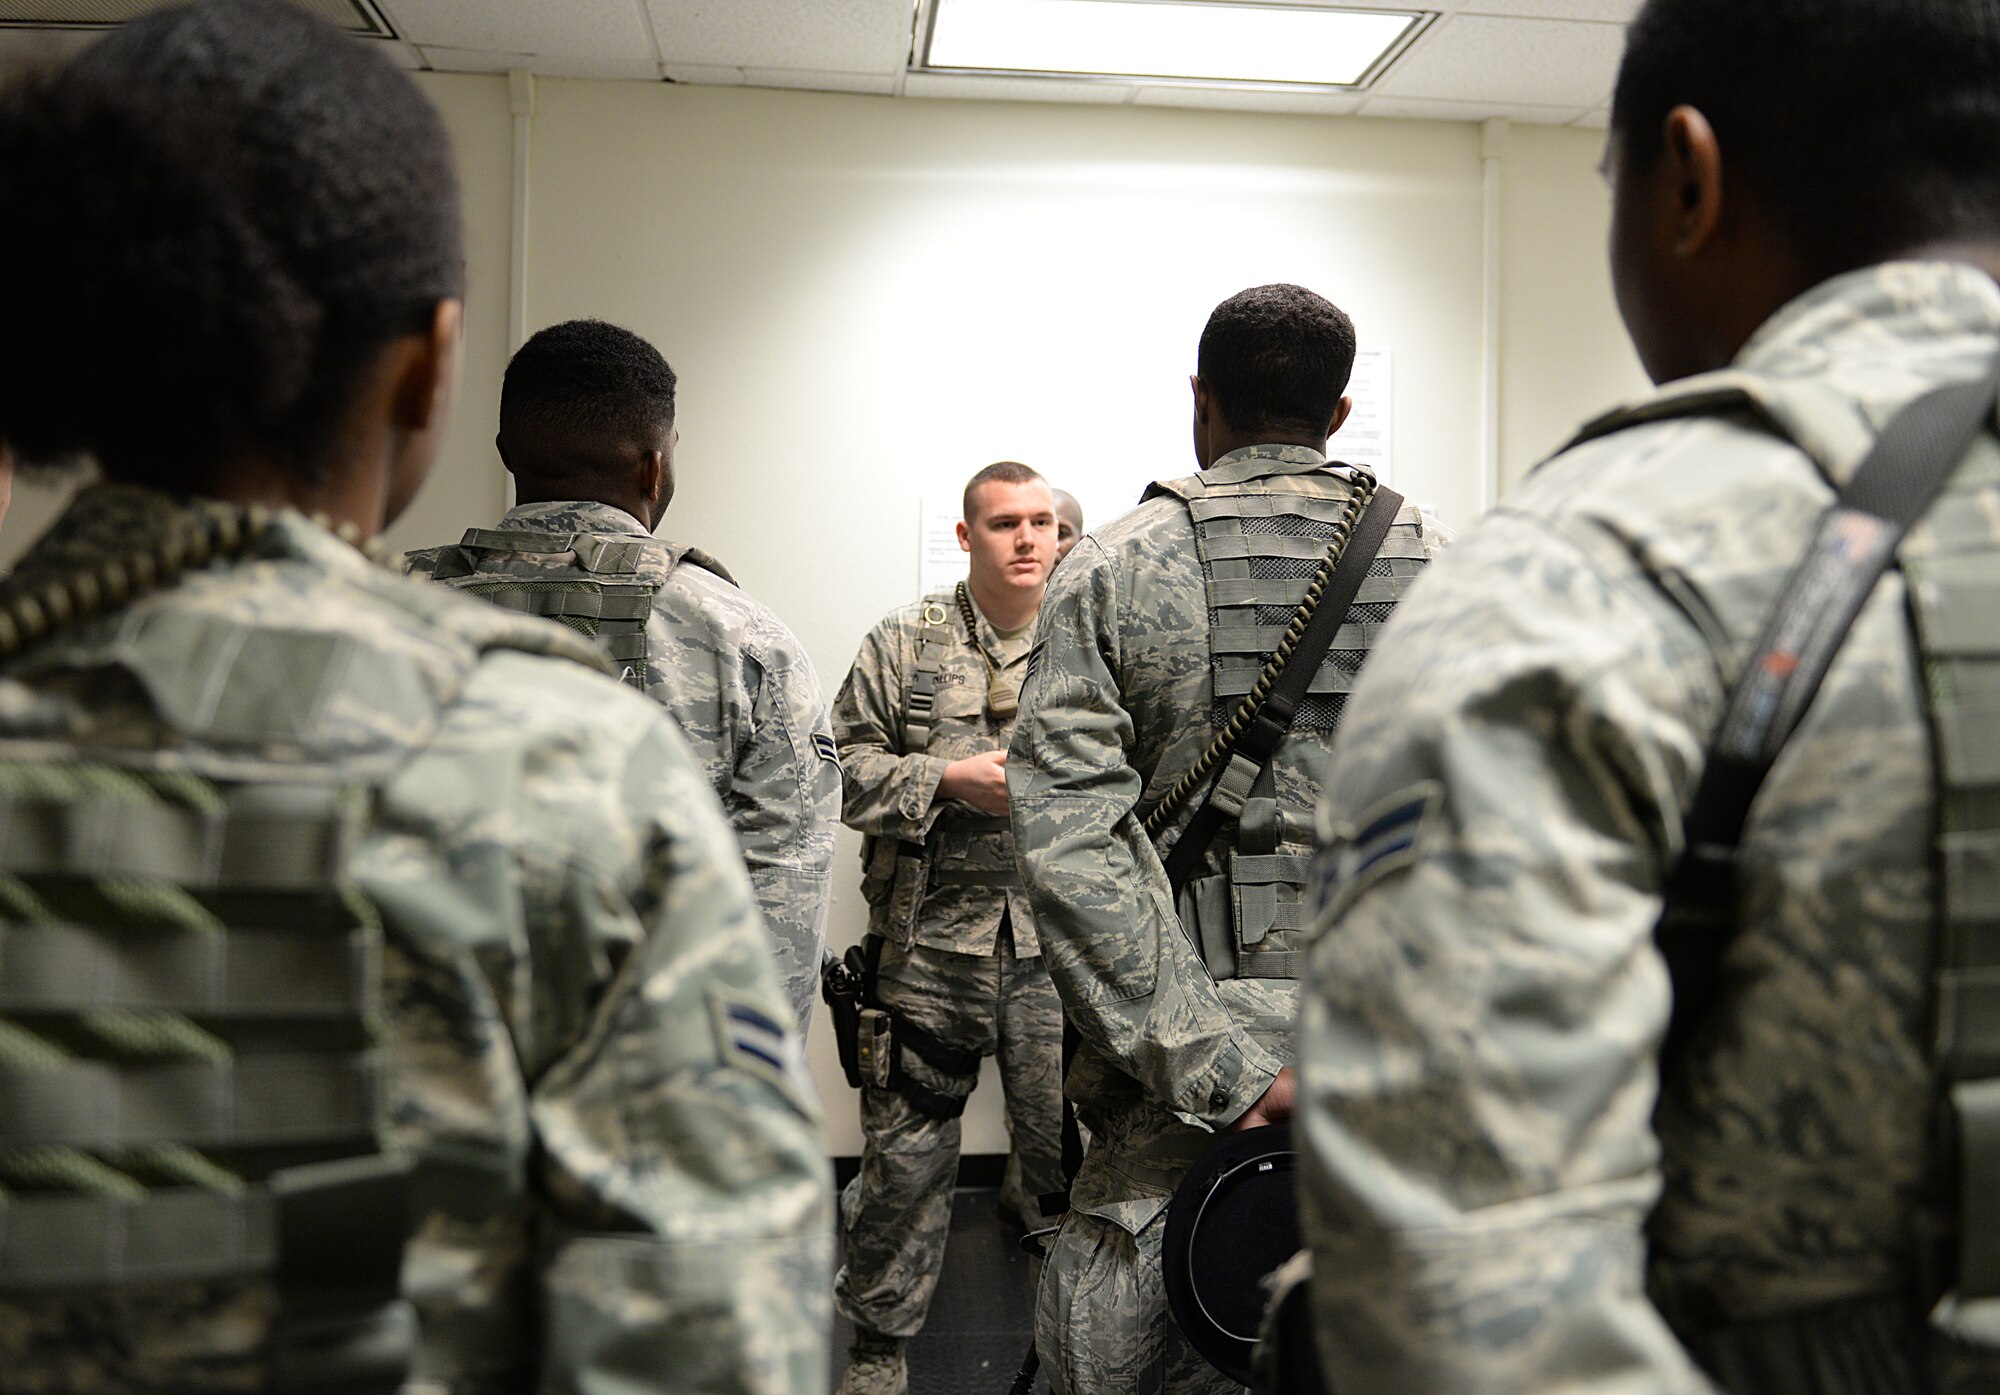 Airmen brief each other at the security forces night shift guard mount March 12, 2015, Keesler Air Force Base, Miss. Prior to starting their shifts, every flight holds  guard mount where accountability, daily messages and safety briefings are conducted. 81st SFS Airmen perform multiple roles to keep members of Keesler safe, ranging from identification checks at base entrances to searching for explosives and narcotics with military working dogs. (U.S. Air Force photo by Senior Airman Holly Mansfield)